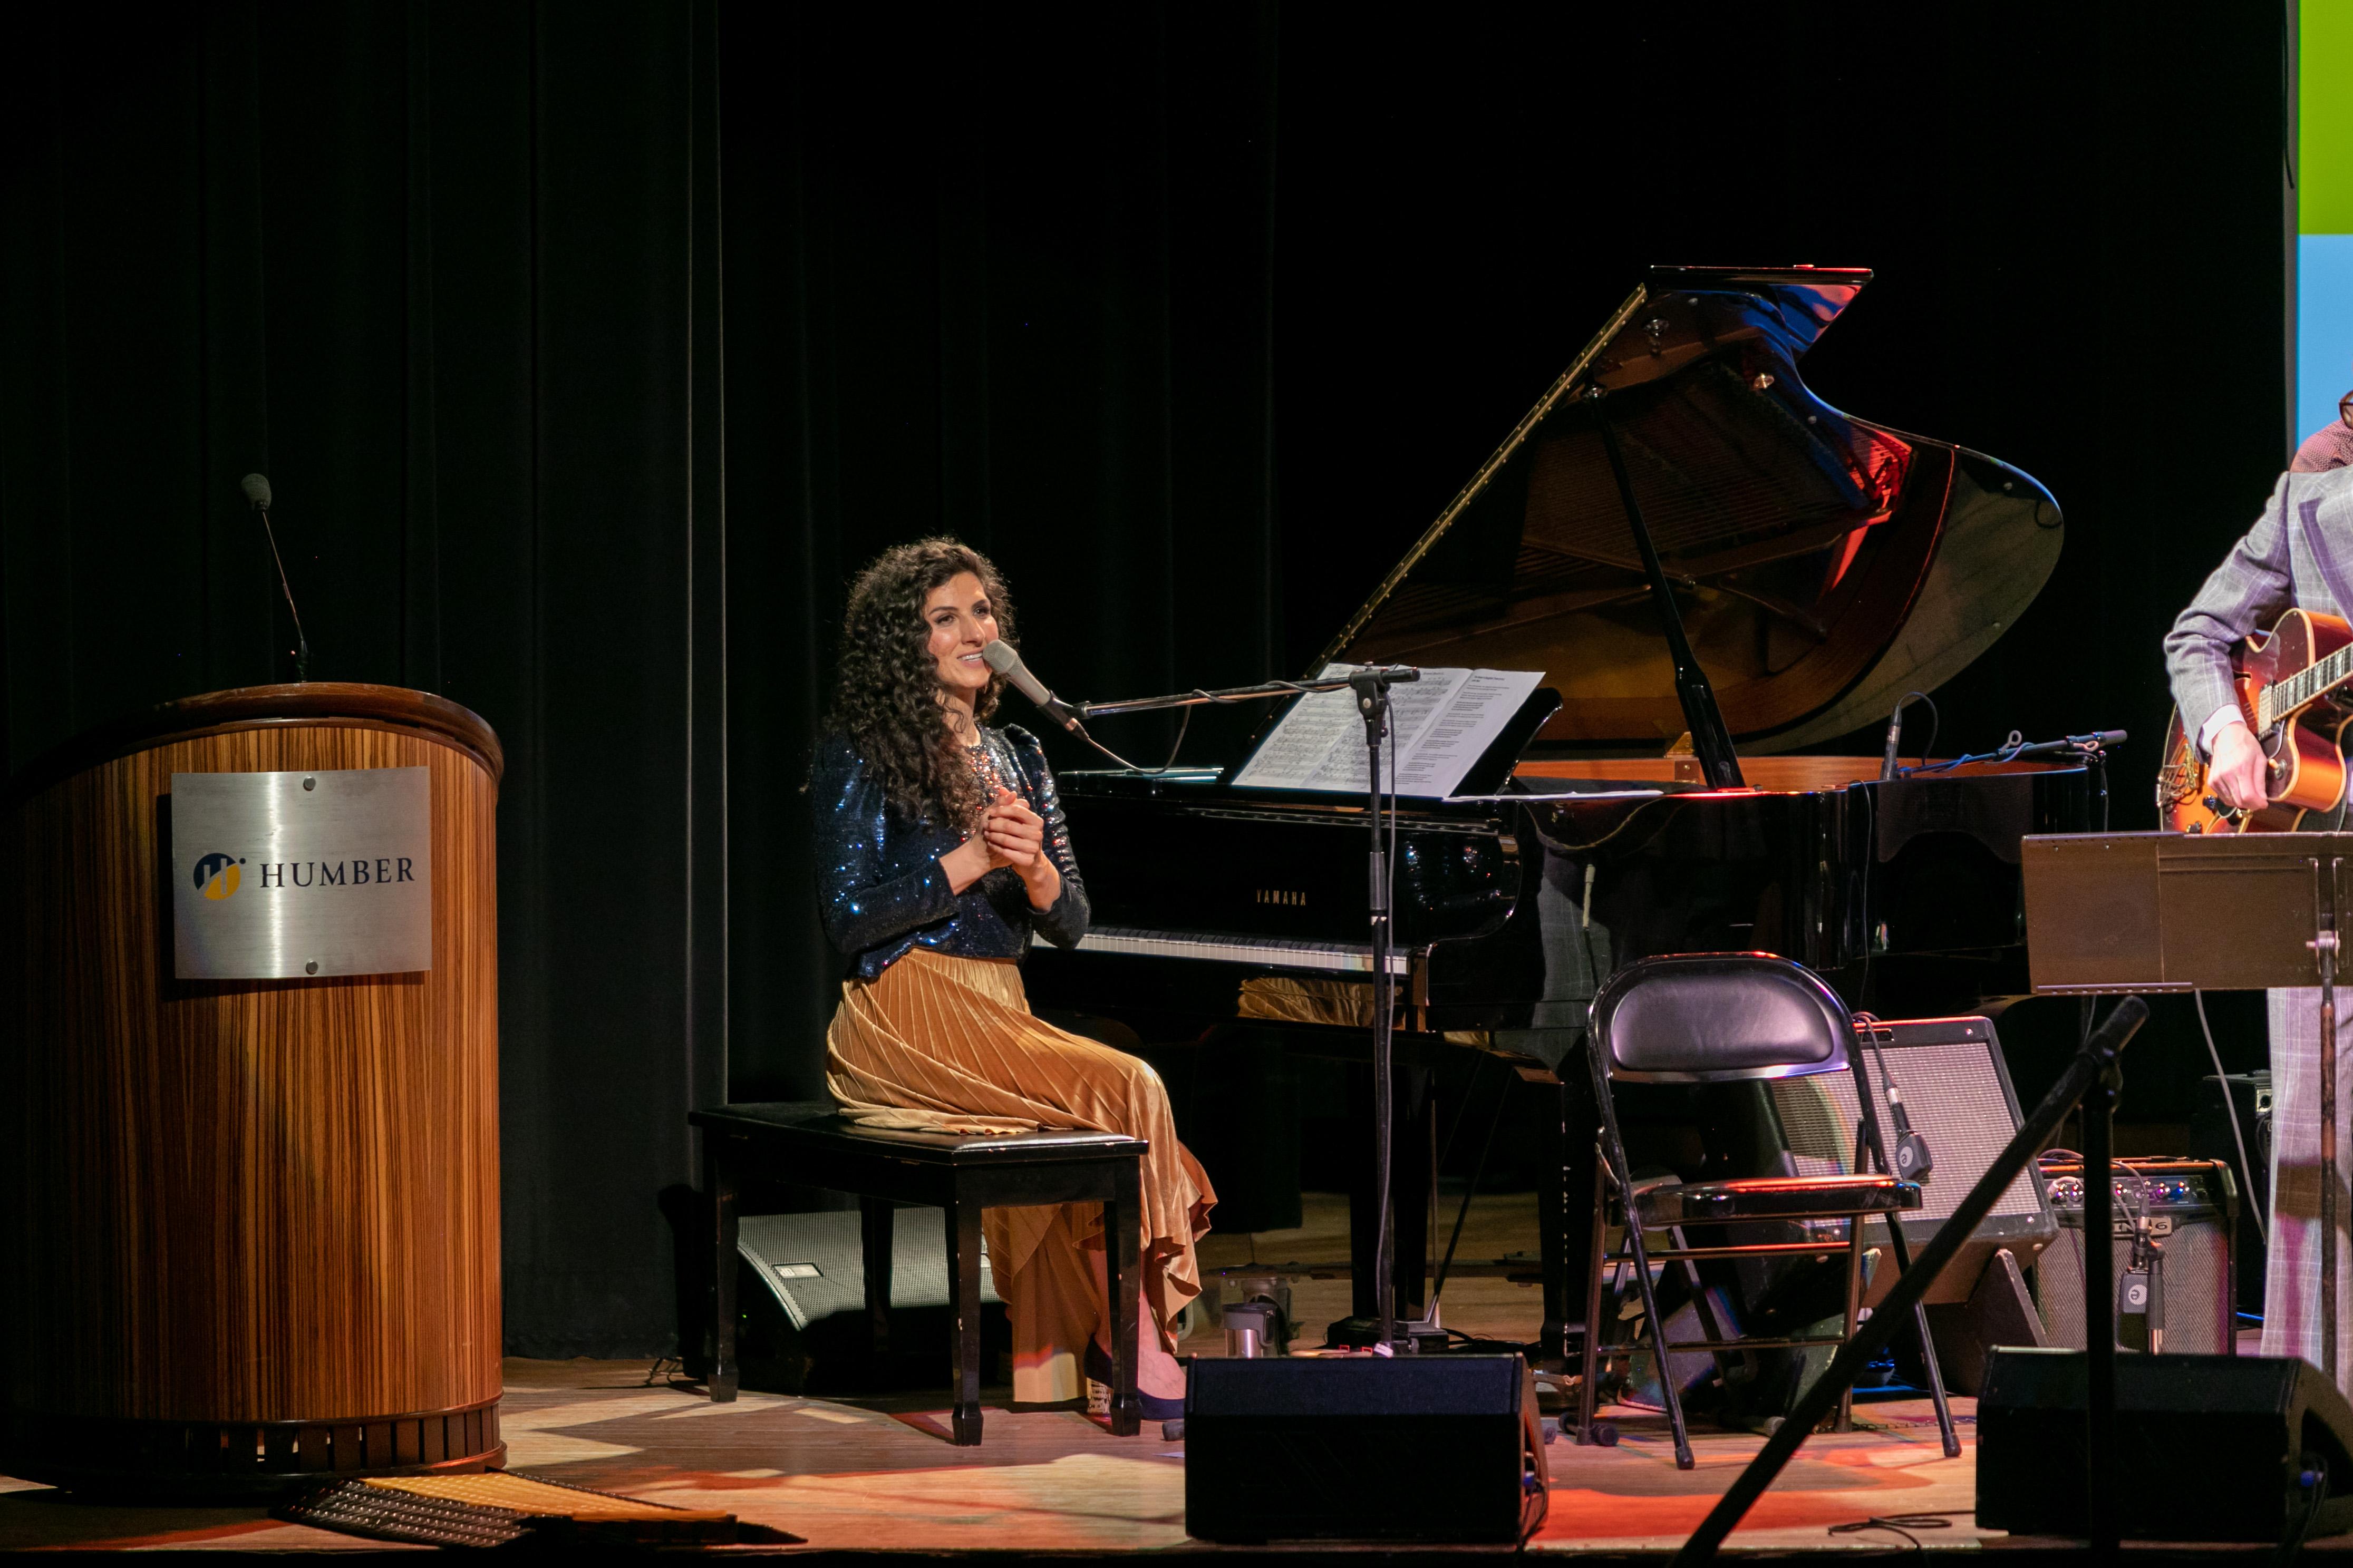 A person sits at a piano while speaking into a microphone.